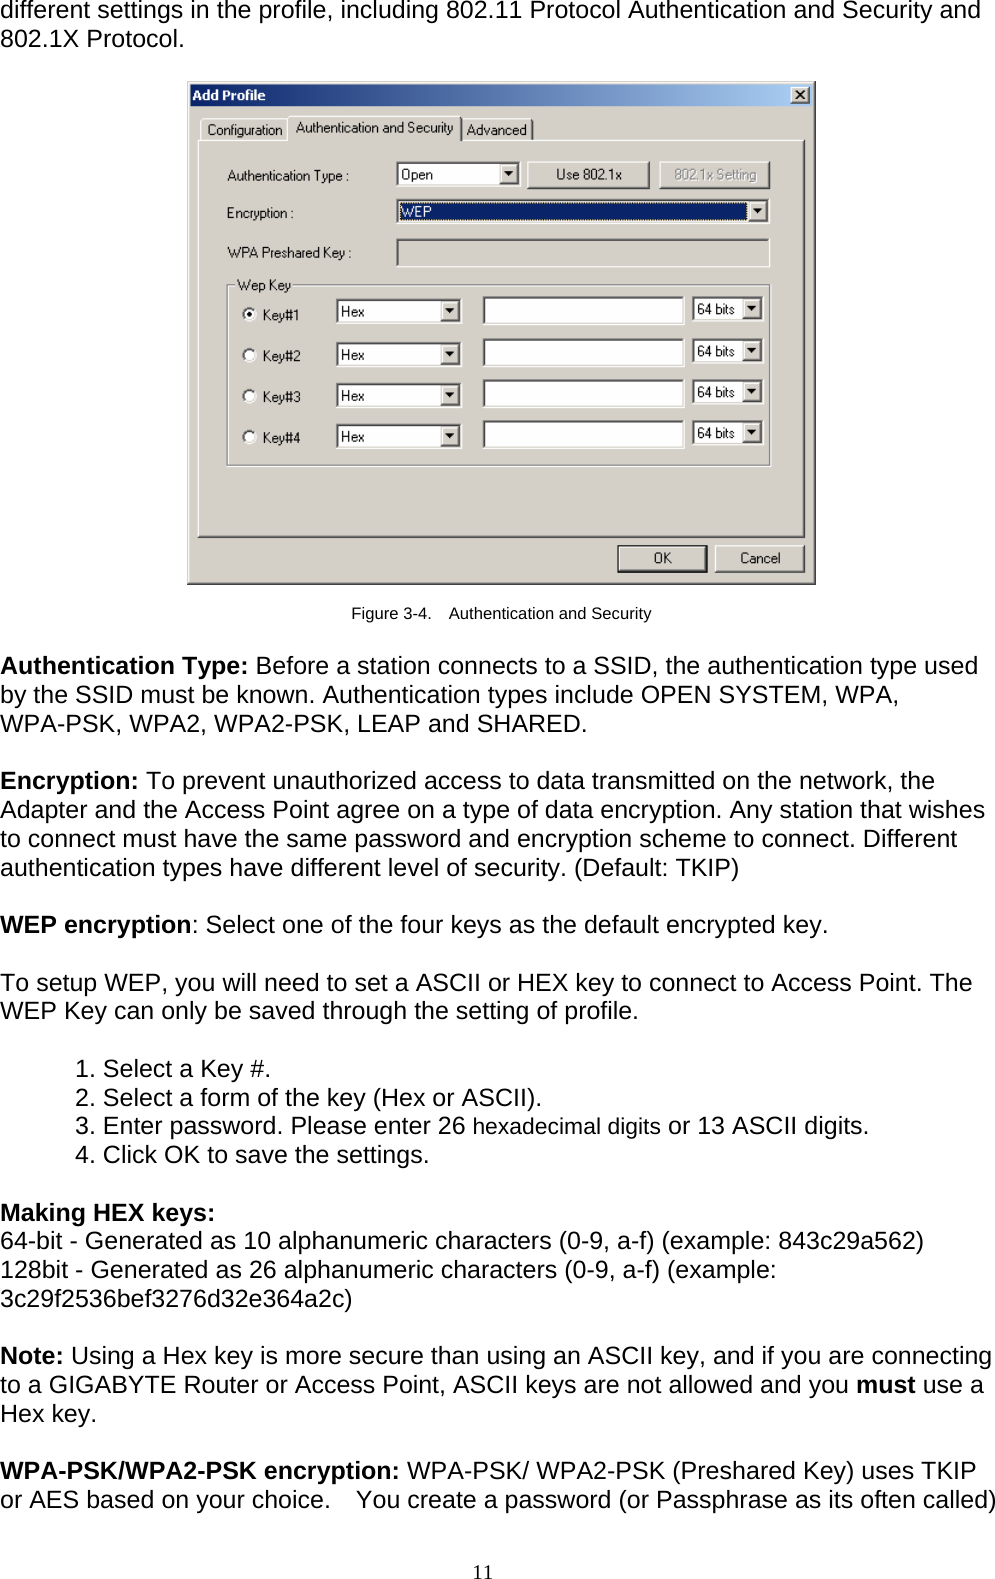 11   different settings in the profile, including 802.11 Protocol Authentication and Security and 802.1X Protocol.    Figure 3-4.    Authentication and Security  Authentication Type: Before a station connects to a SSID, the authentication type used by the SSID must be known. Authentication types include OPEN SYSTEM, WPA, WPA-PSK, WPA2, WPA2-PSK, LEAP and SHARED.    Encryption: To prevent unauthorized access to data transmitted on the network, the Adapter and the Access Point agree on a type of data encryption. Any station that wishes to connect must have the same password and encryption scheme to connect. Different authentication types have different level of security. (Default: TKIP)  WEP encryption: Select one of the four keys as the default encrypted key.  To setup WEP, you will need to set a ASCII or HEX key to connect to Access Point. The WEP Key can only be saved through the setting of profile.  1. Select a Key #. 2. Select a form of the key (Hex or ASCII). 3. Enter password. Please enter 26 hexadecimal digits or 13 ASCII digits. 4. Click OK to save the settings.  Making HEX keys: 64-bit - Generated as 10 alphanumeric characters (0-9, a-f) (example: 843c29a562) 128bit - Generated as 26 alphanumeric characters (0-9, a-f) (example: 3c29f2536bef3276d32e364a2c)  Note: Using a Hex key is more secure than using an ASCII key, and if you are connecting to a GIGABYTE Router or Access Point, ASCII keys are not allowed and you must use a Hex key.  WPA-PSK/WPA2-PSK encryption: WPA-PSK/ WPA2-PSK (Preshared Key) uses TKIP or AES based on your choice.    You create a password (or Passphrase as its often called) 